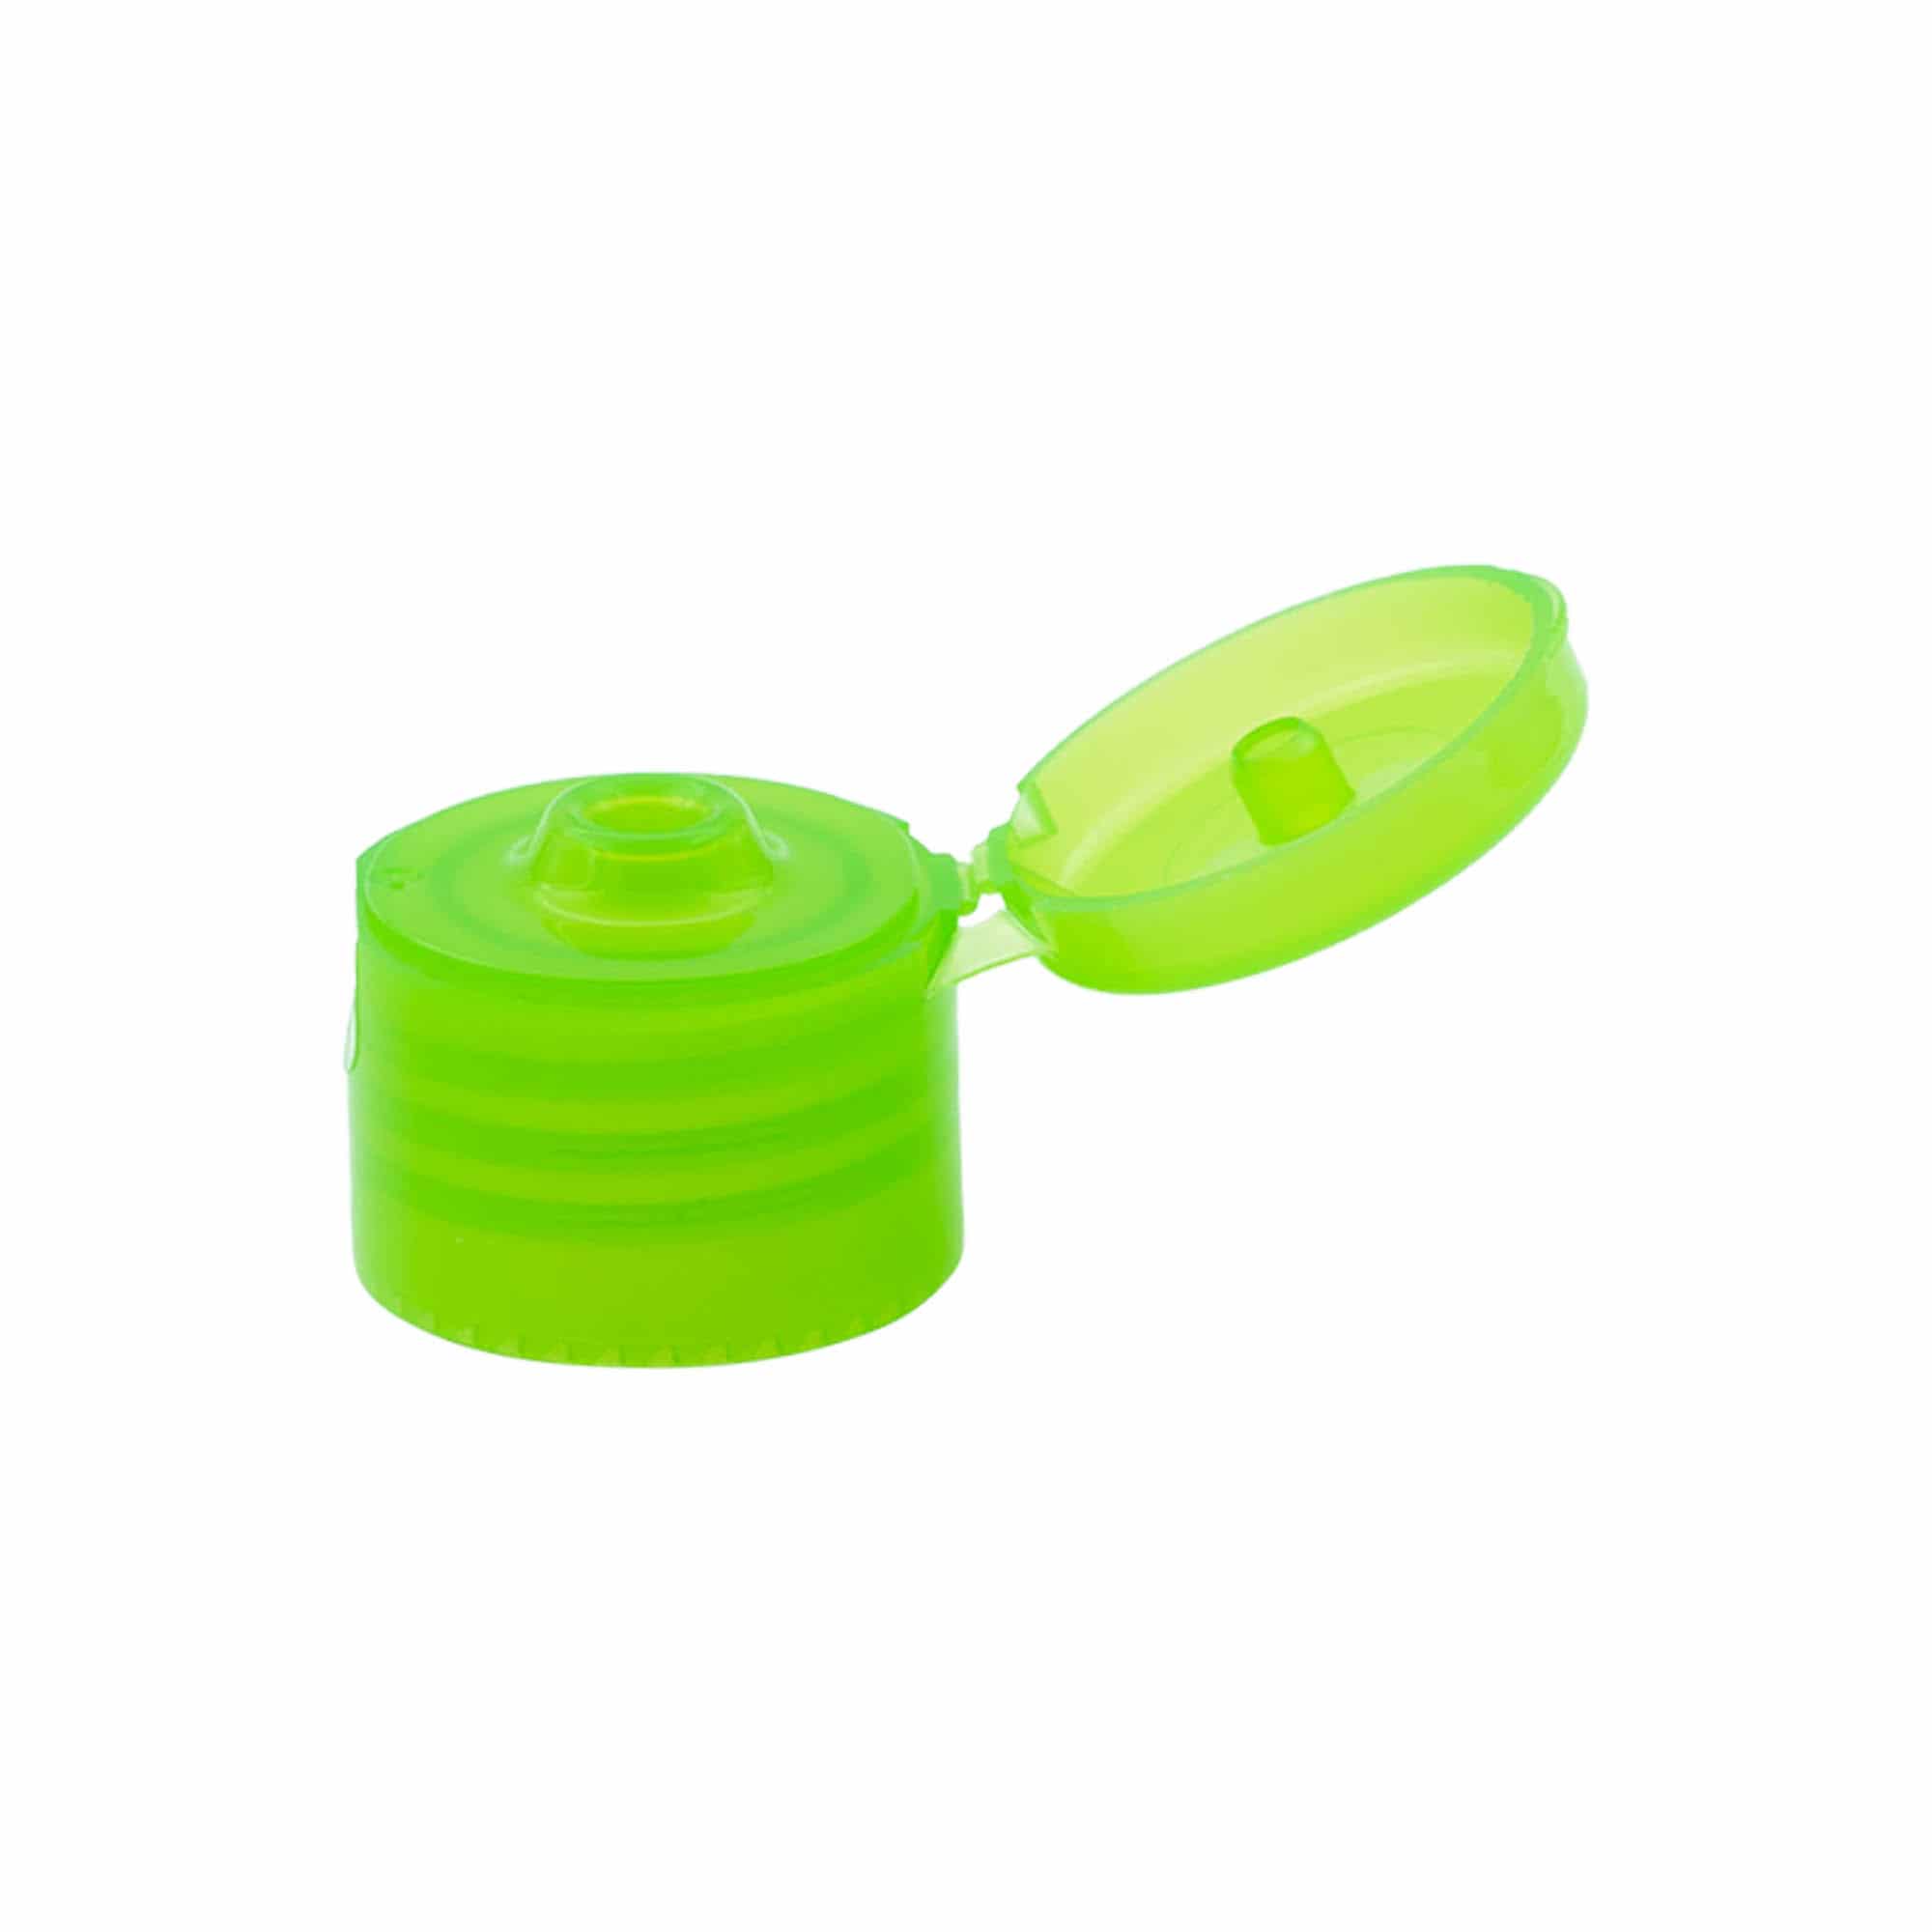 Hinged screw cap, PP plastic, green, for opening: GPI 24/410